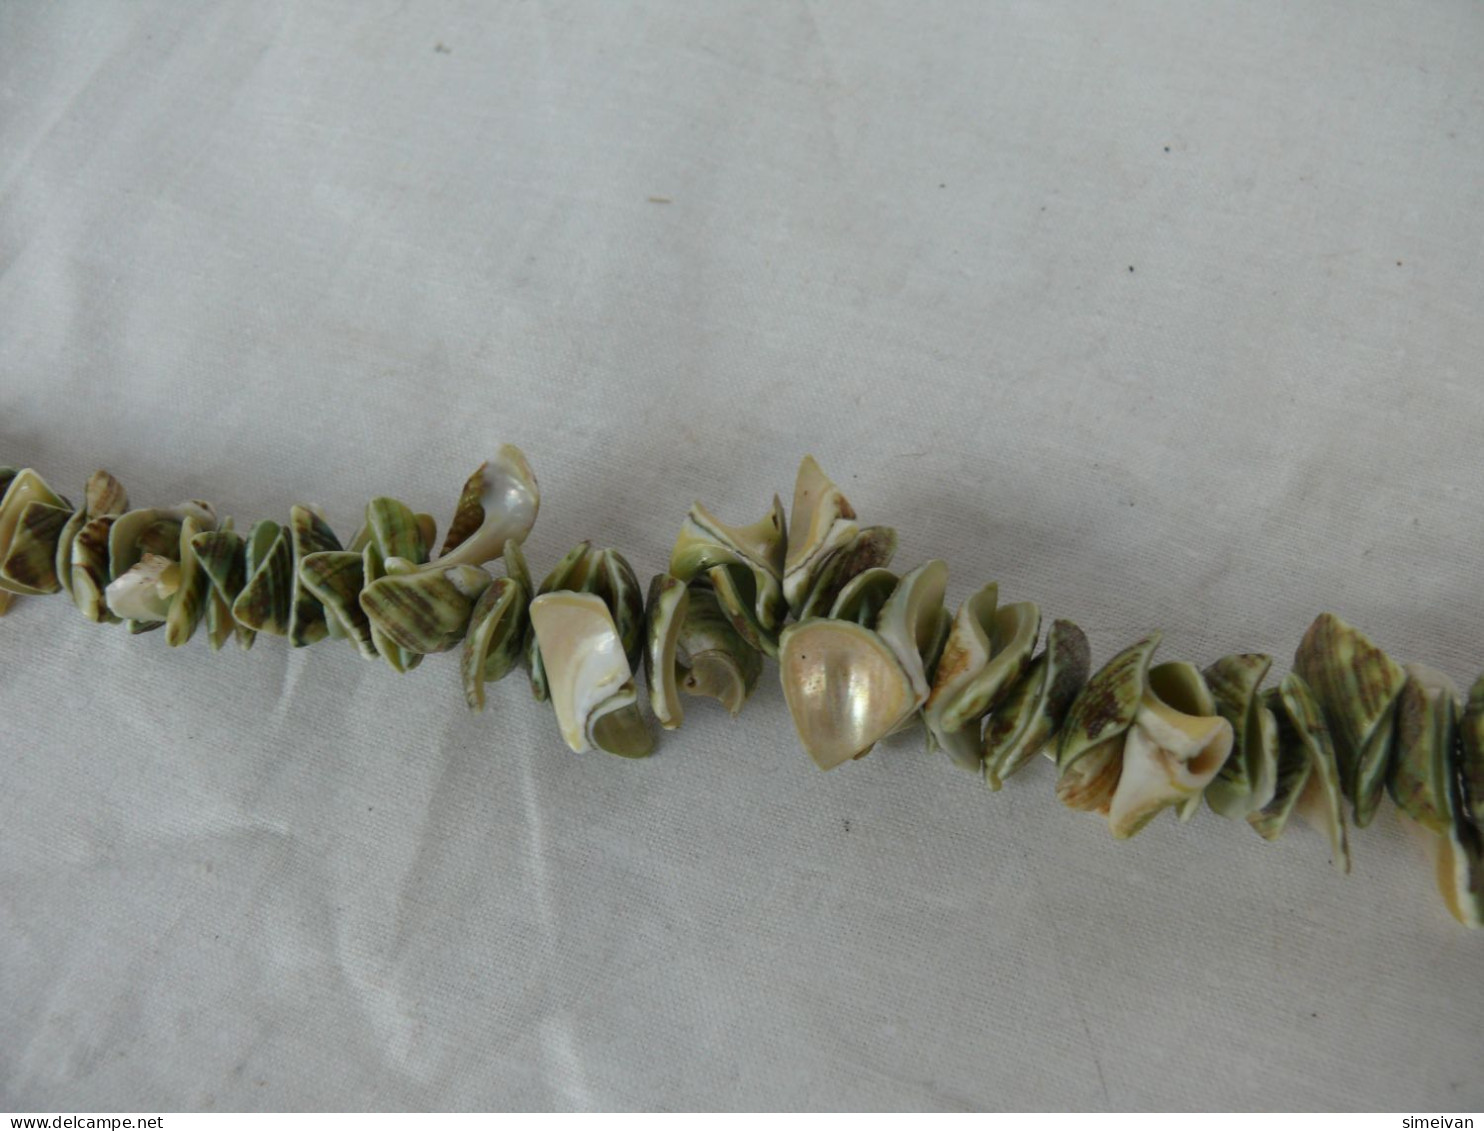 Beautiful Natural Shells Necklace Green Tone #1518 - Necklaces/Chains